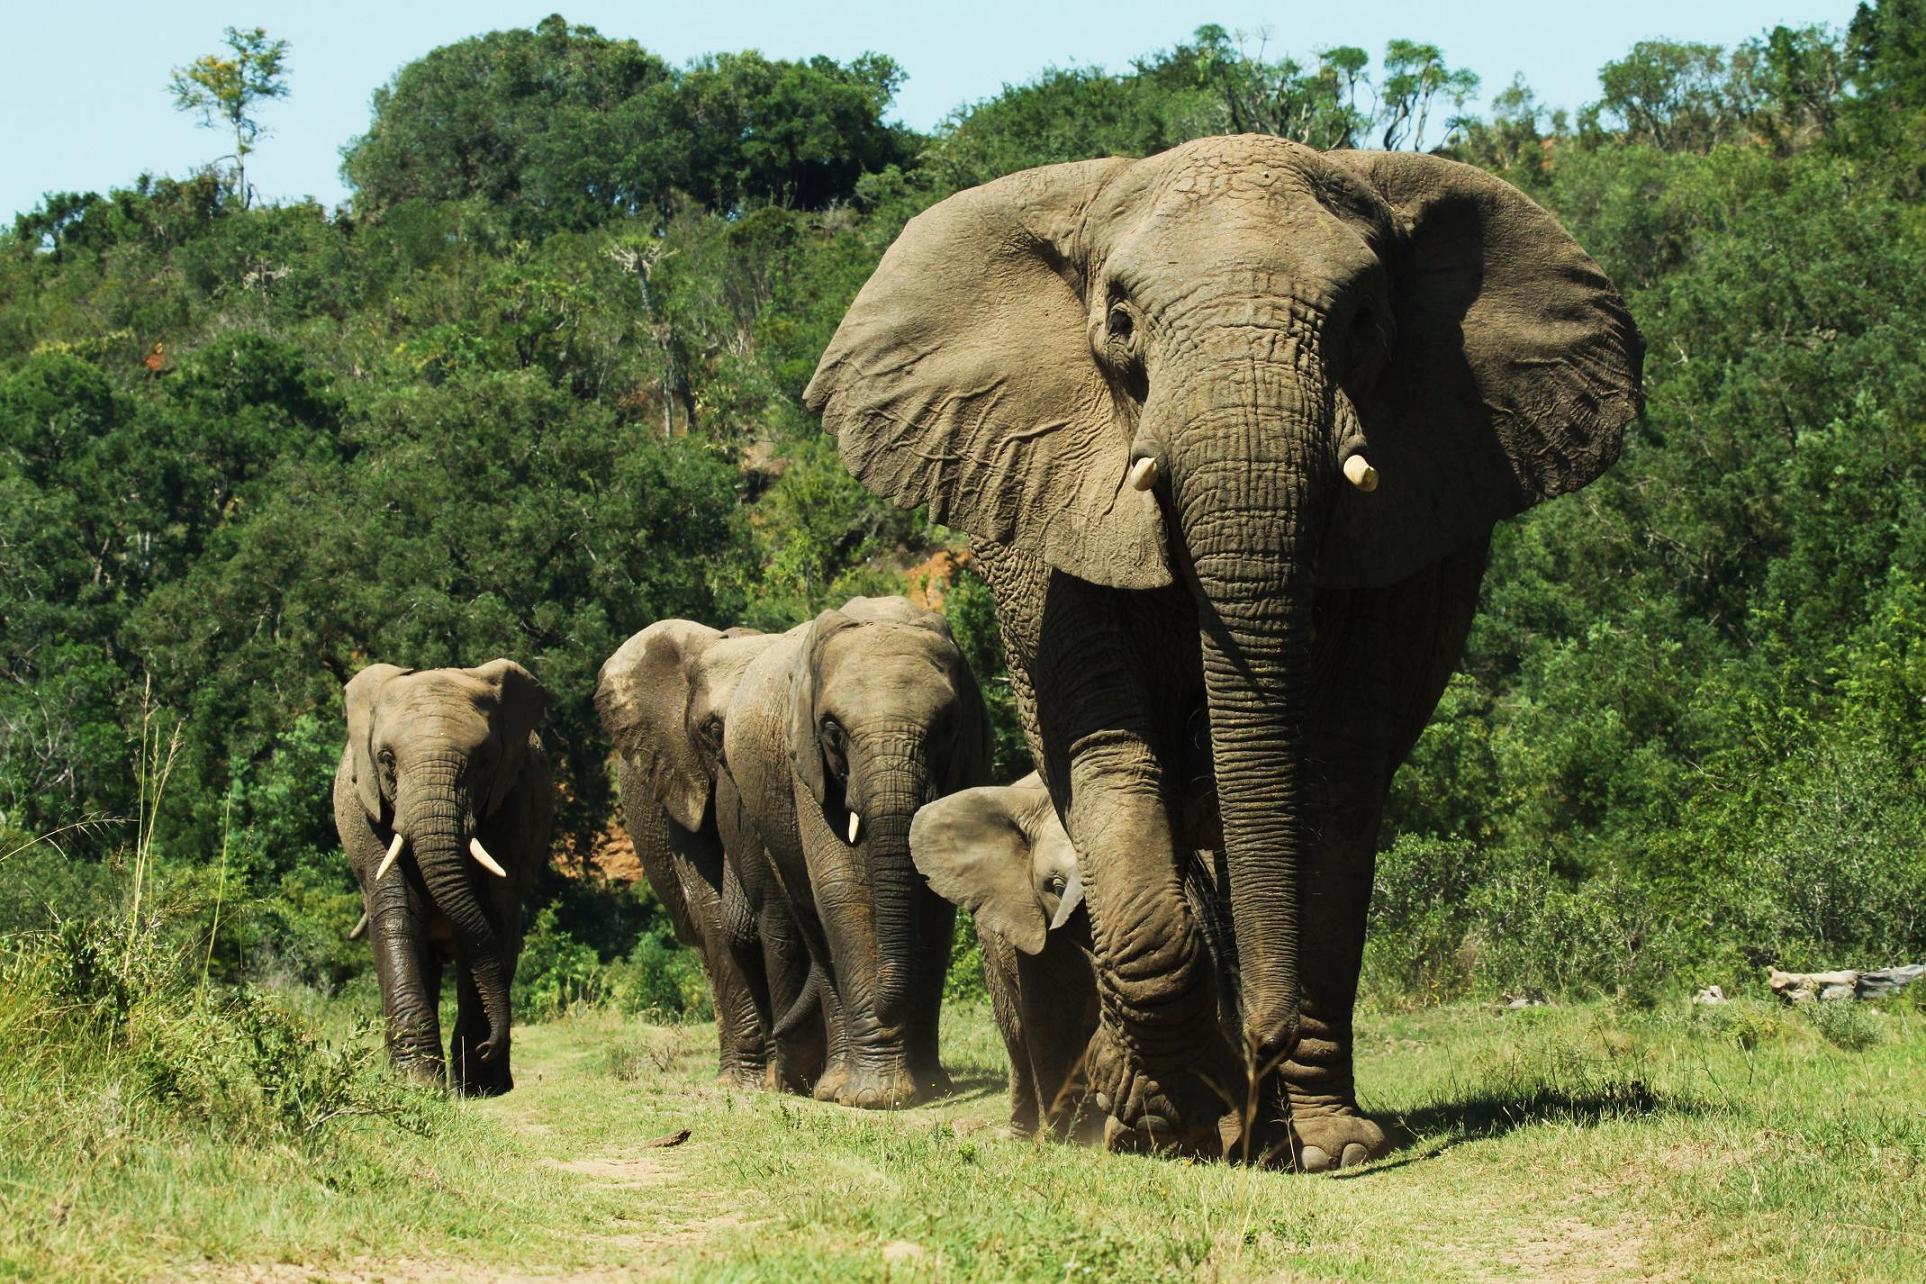 A truly incredible sight of a group of elephants walking across the plains of South Africa